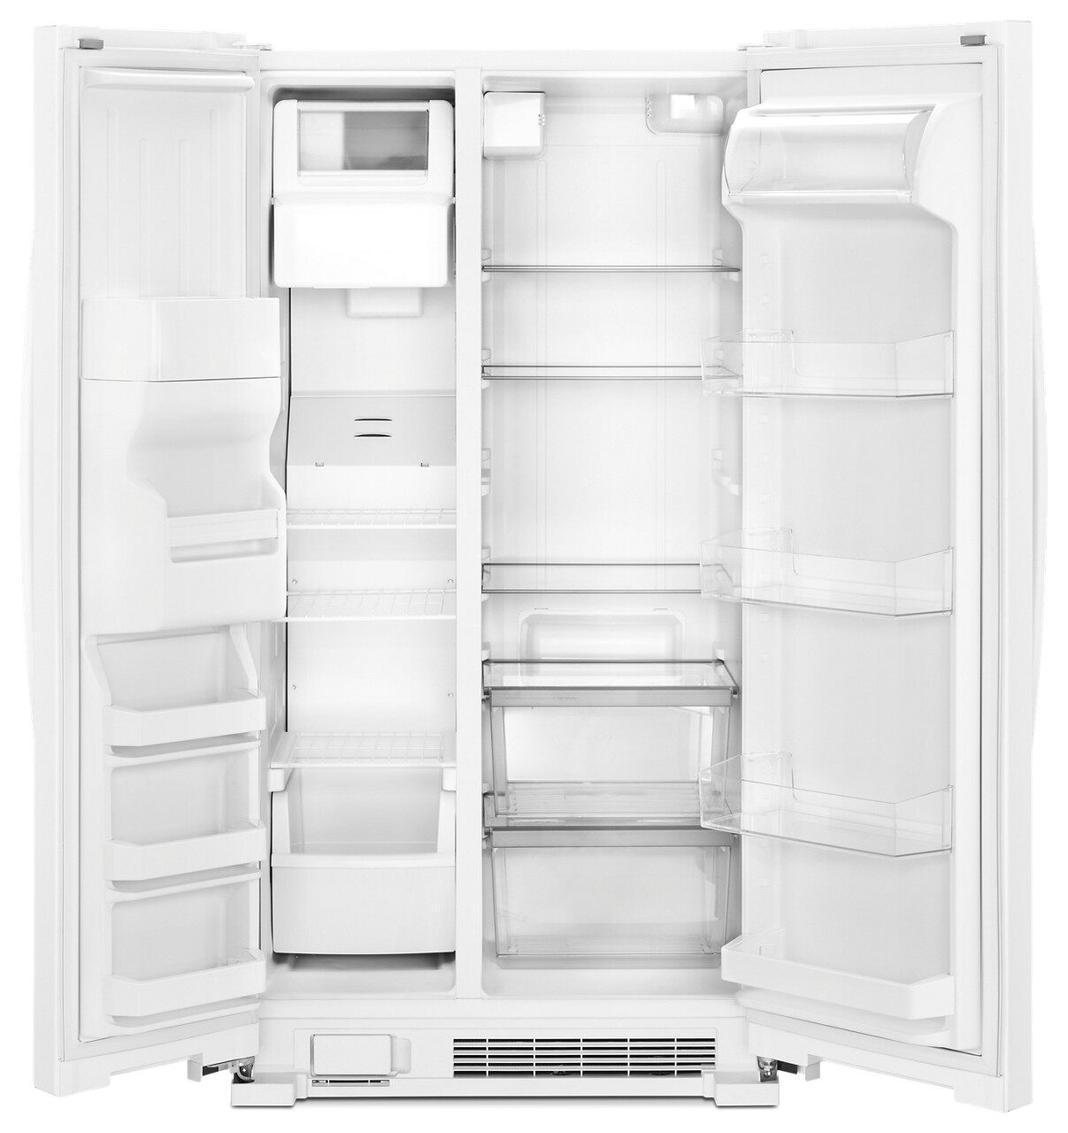 Whirlpool - 35.875 Inch 25 cu. ft Side by Side Refrigerator in White - WRS335SDHW